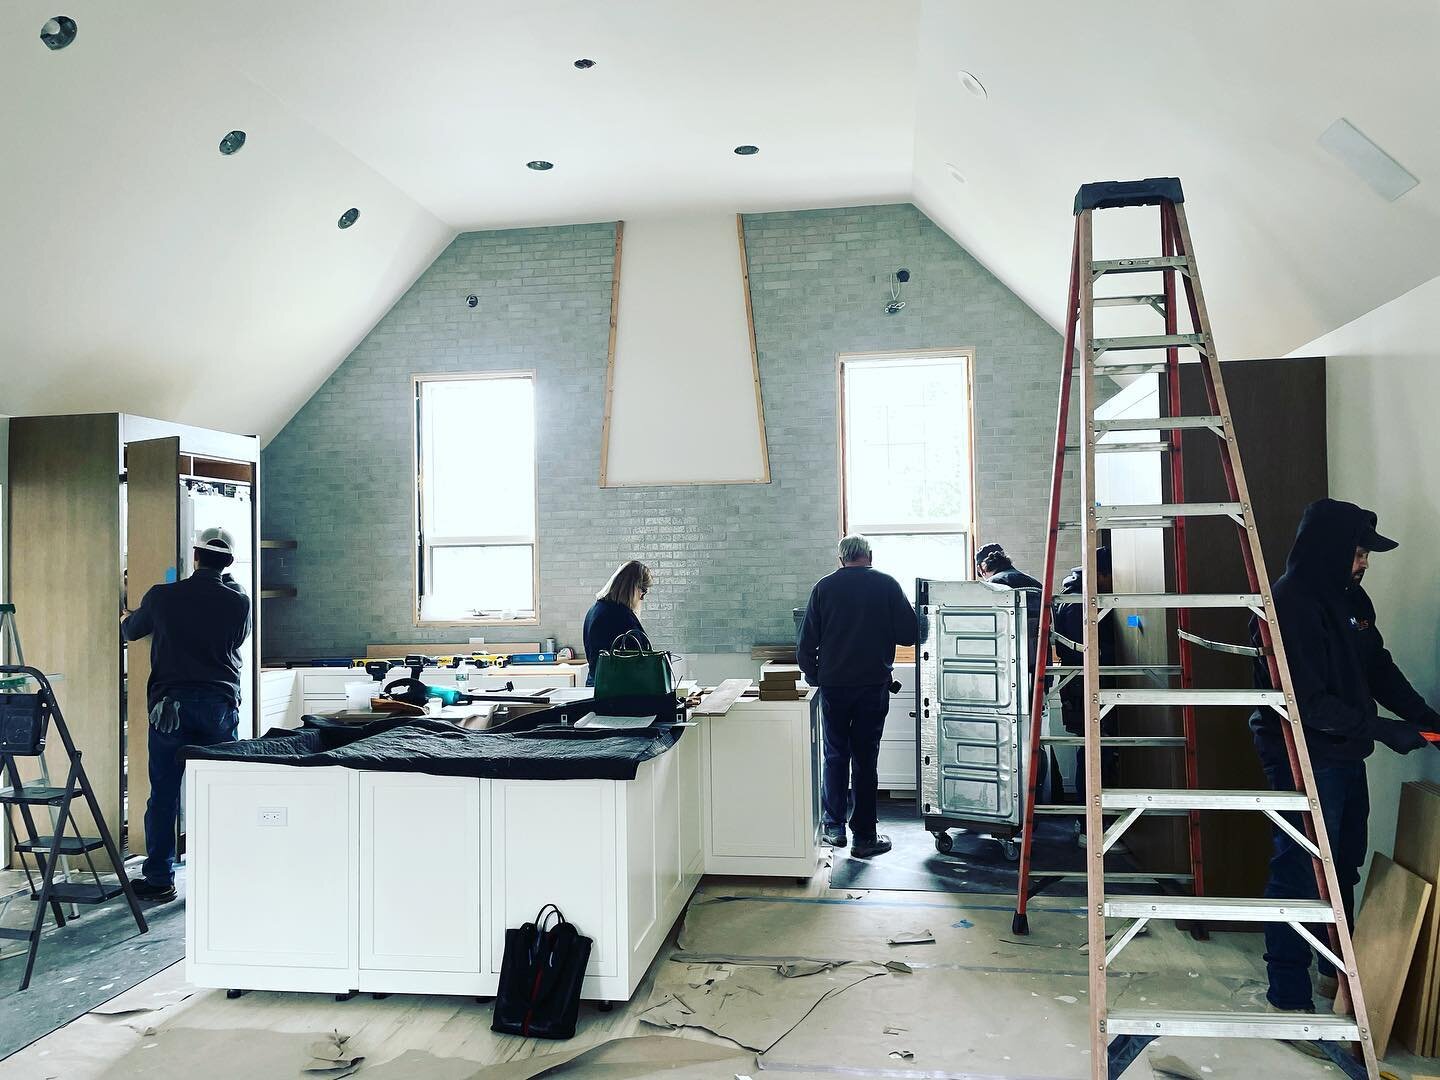 It takes a village. Sometimes incorporated. 🙏 to the dream team ❤️ client ❤️ AJ ❤️ Oscar ❤️Laura ❤️ Peter #SagHarbor 
&bull;
&bull;
&bull;
#architecture #interiors #renovations #kitchen #airbnb #bar #millwork #tile  #interiordesign #driftowwd #super